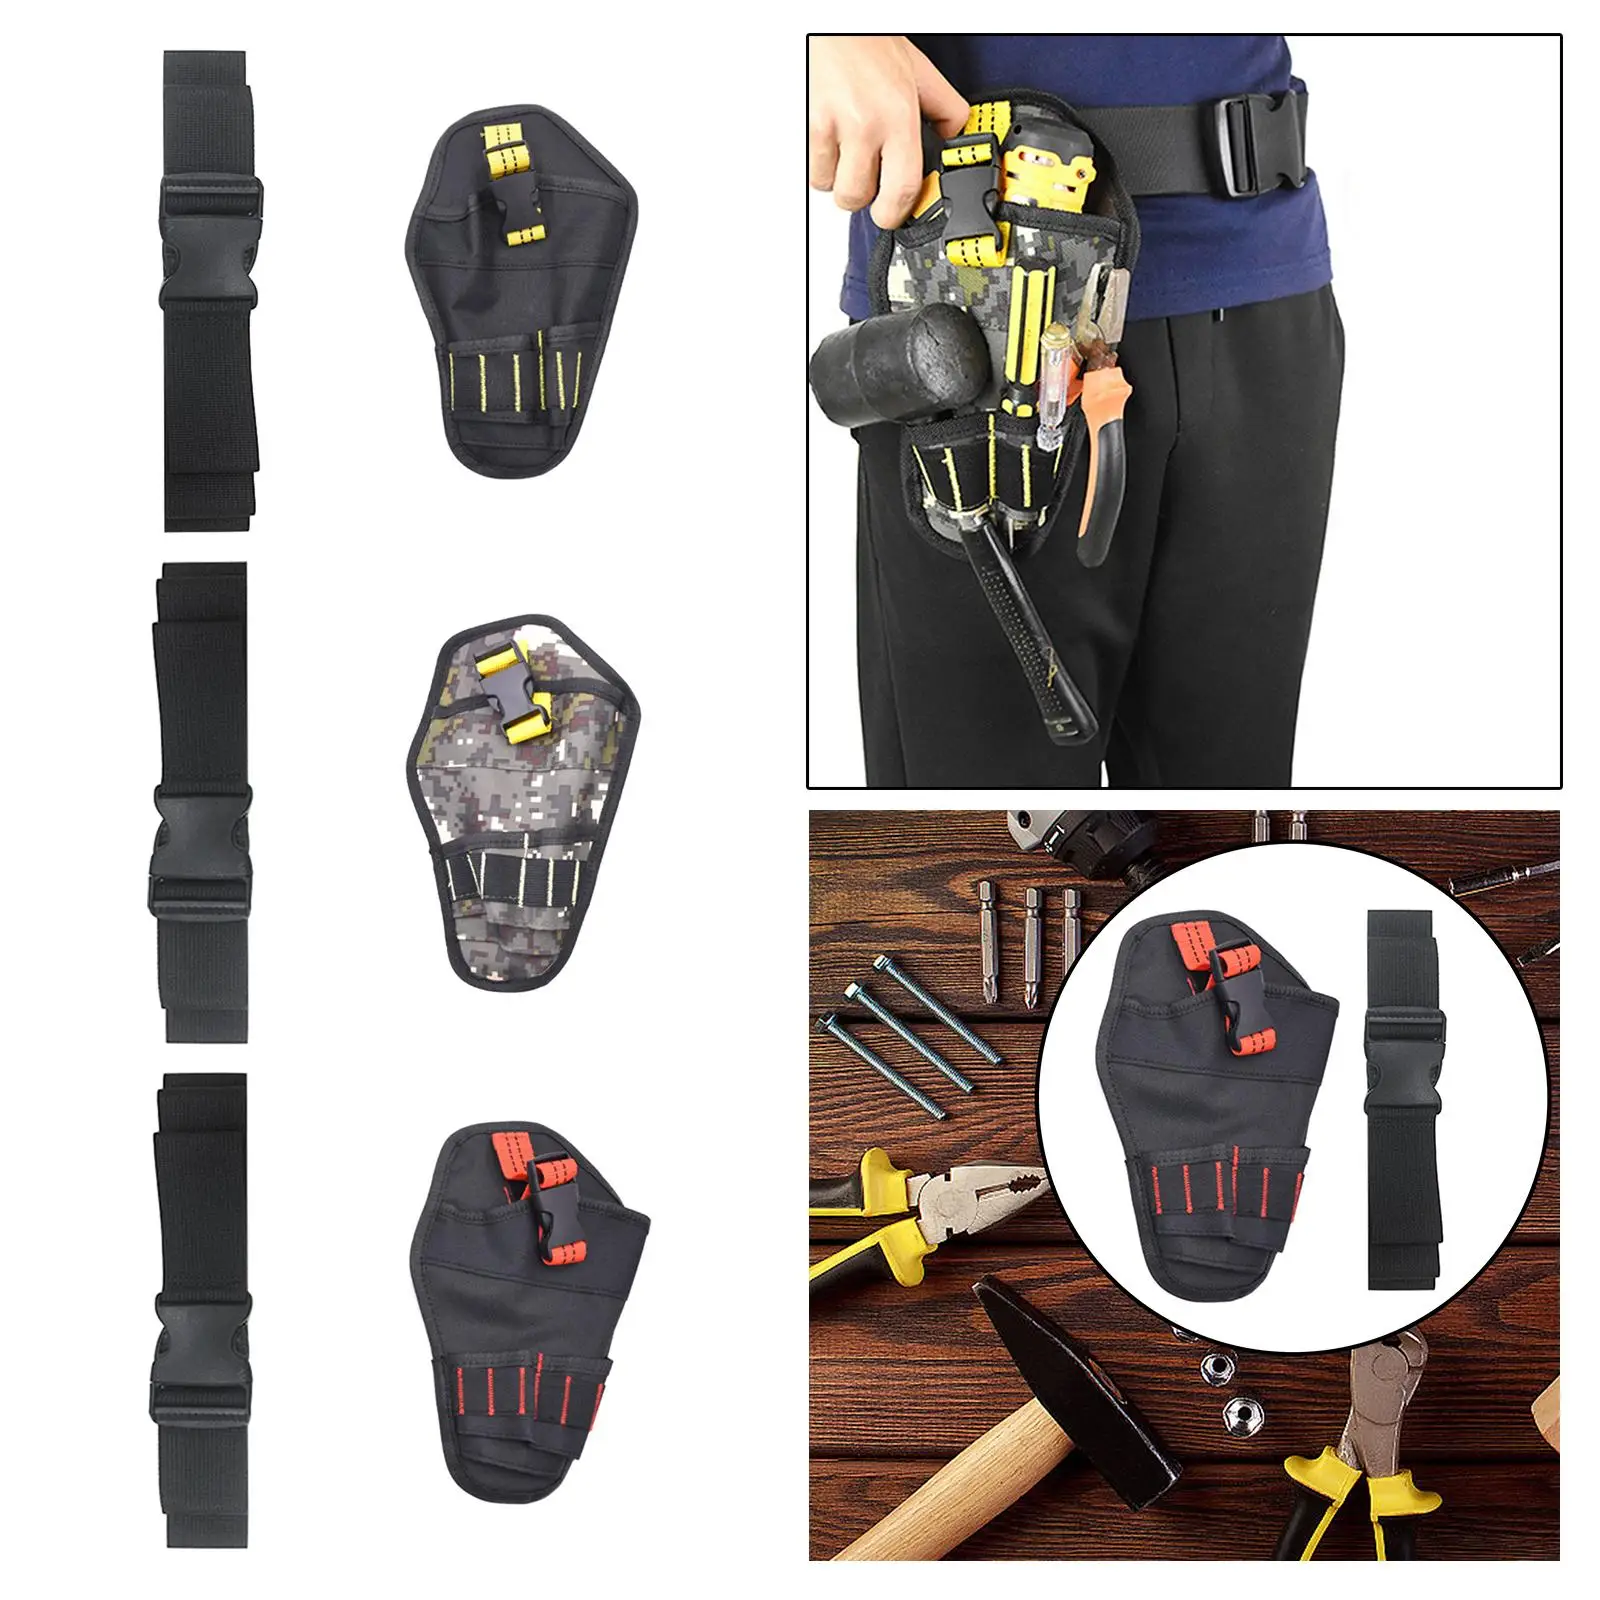 Drill Holster Bag Convenient Multifunctional Quick Electrician Belt Bag Tool Set for Electrician Carpenters Construction Worker